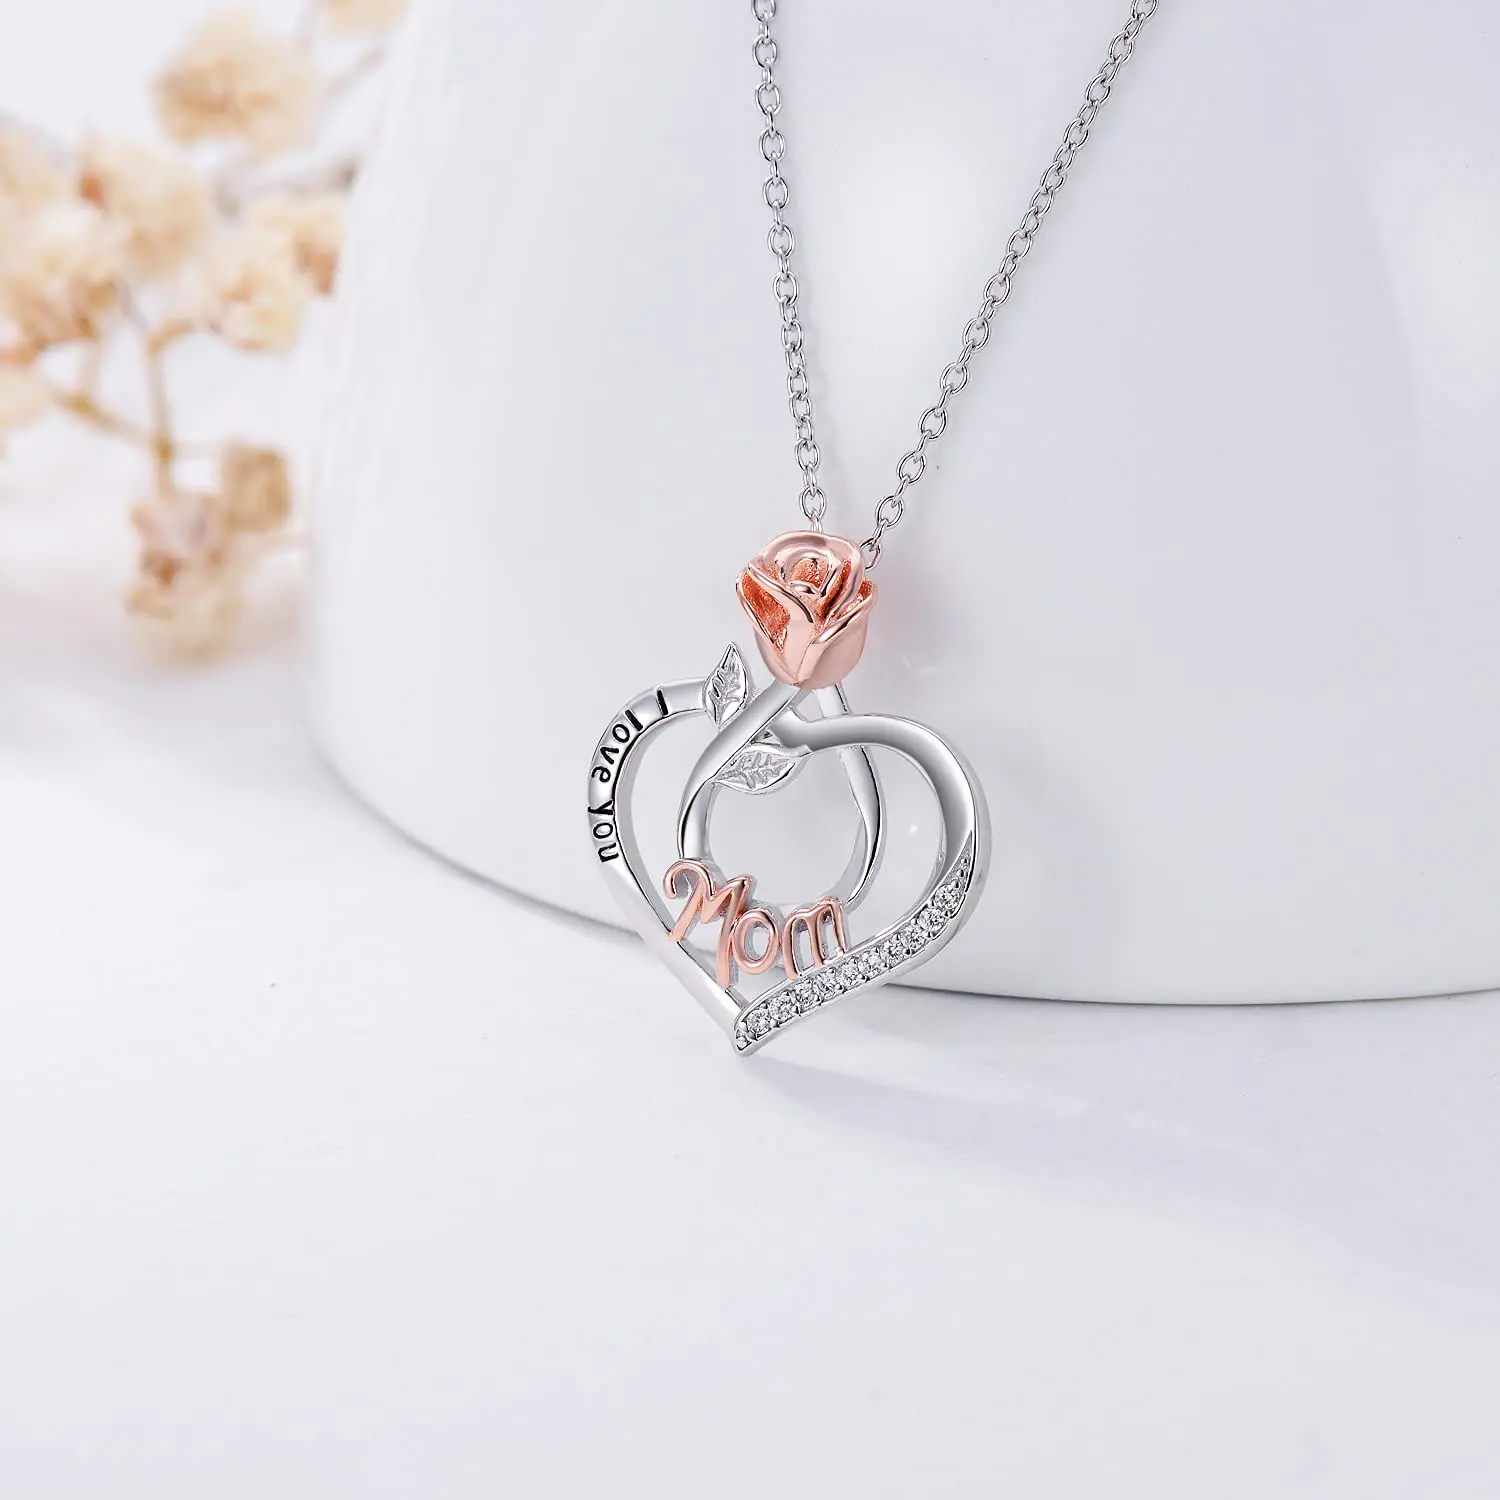 Hoyon Fine S925 Silver Jewelry Necklace Heart-Shaped Sterling Silver Rose Pendant Flower Necklace Heart Mom Necklace